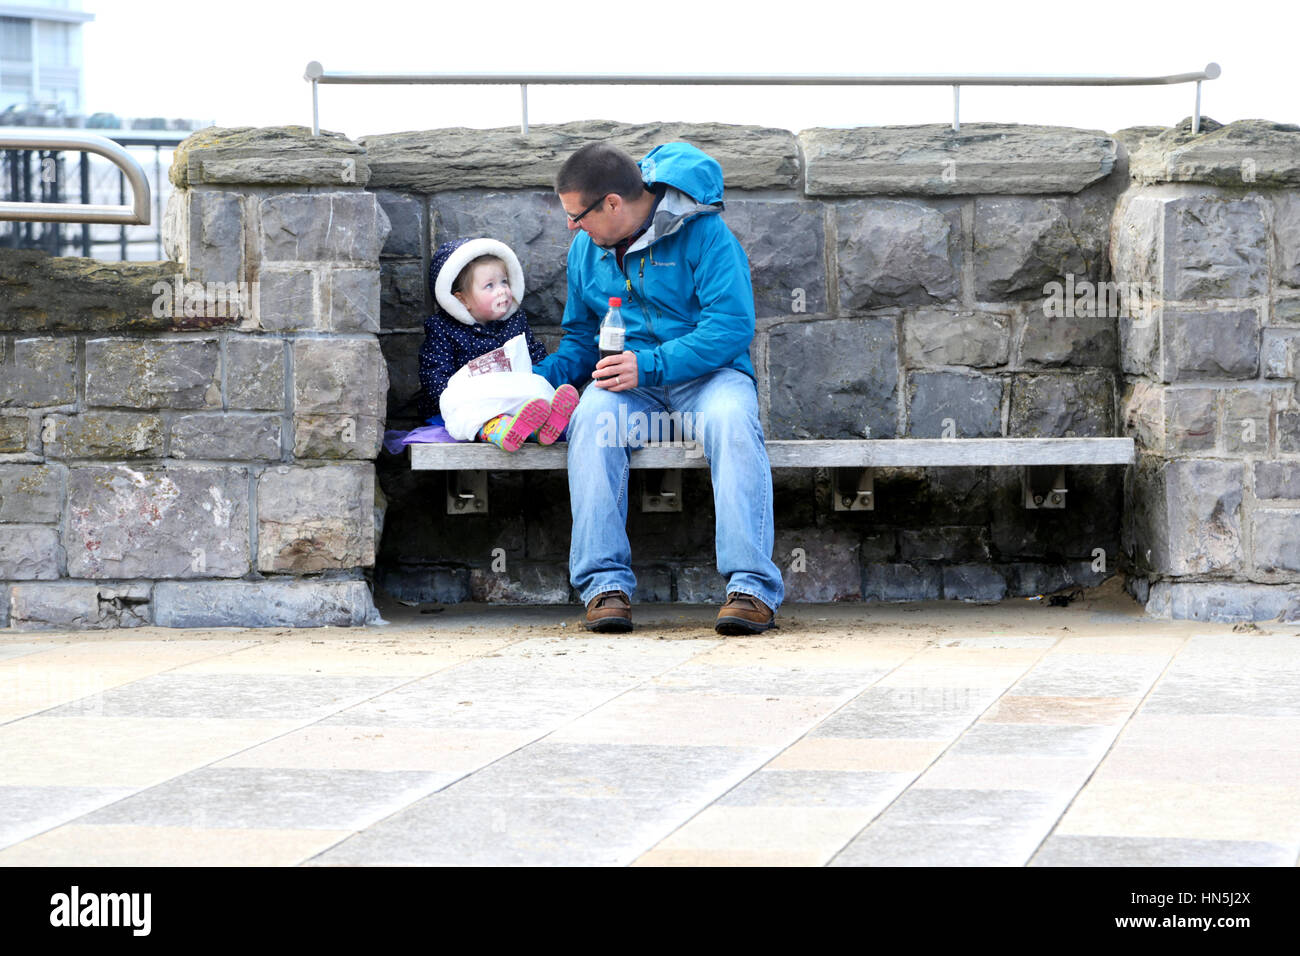 A grandfather sitting outdoors on a wooden bench sharing a bag of traditional fish and chips with his young granddaughter Stock Photo